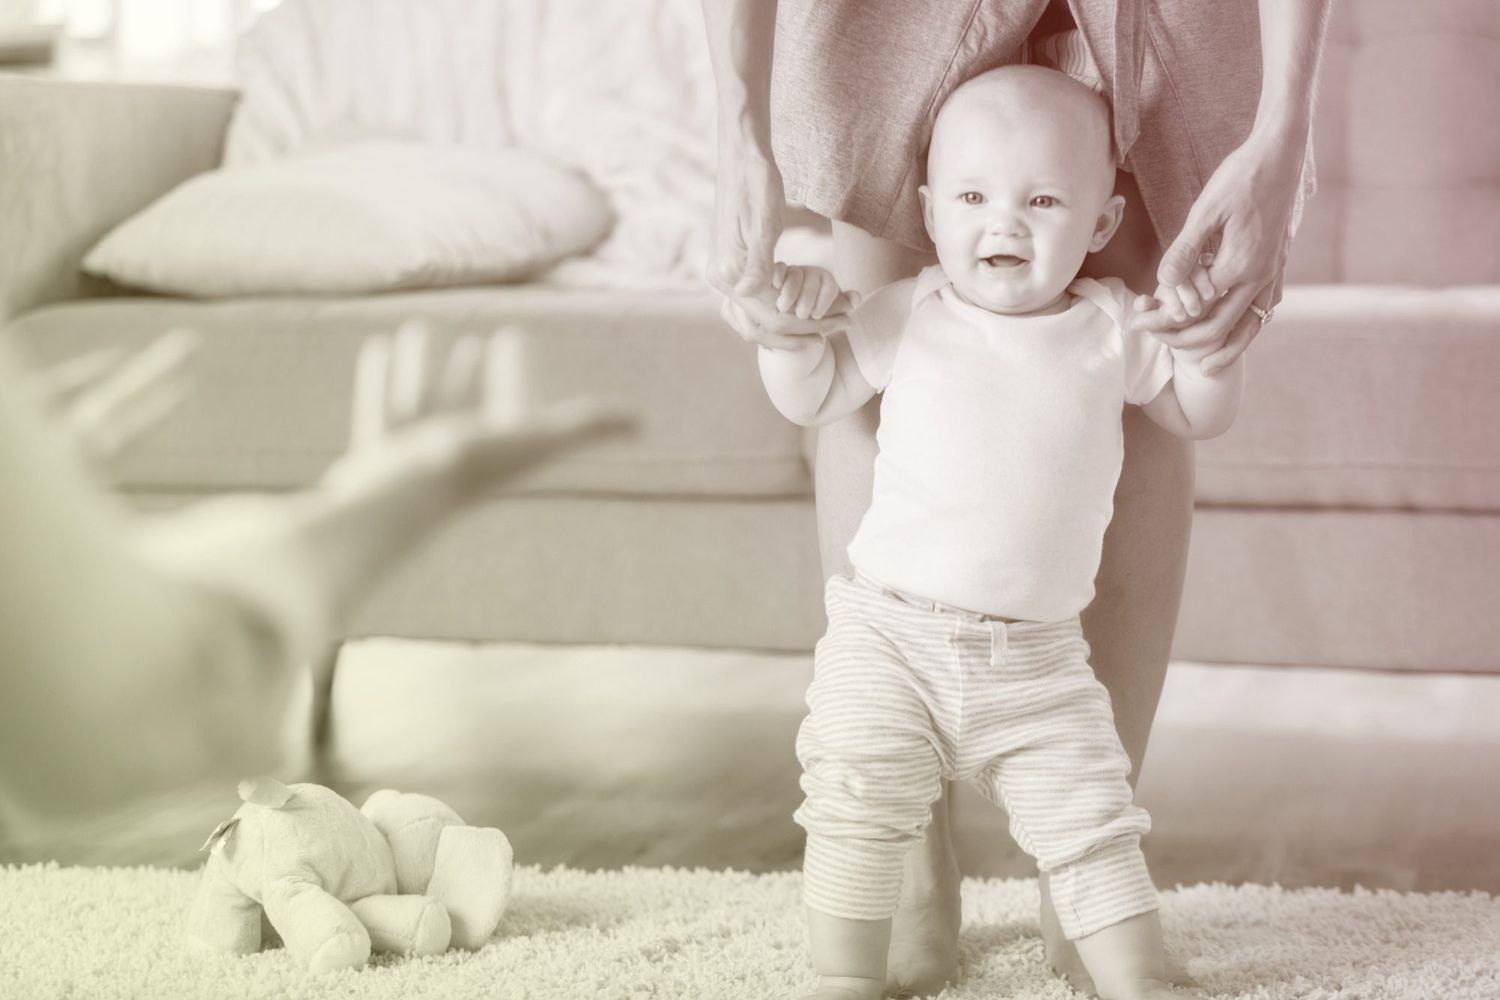 Baby being taught how to walk by parents